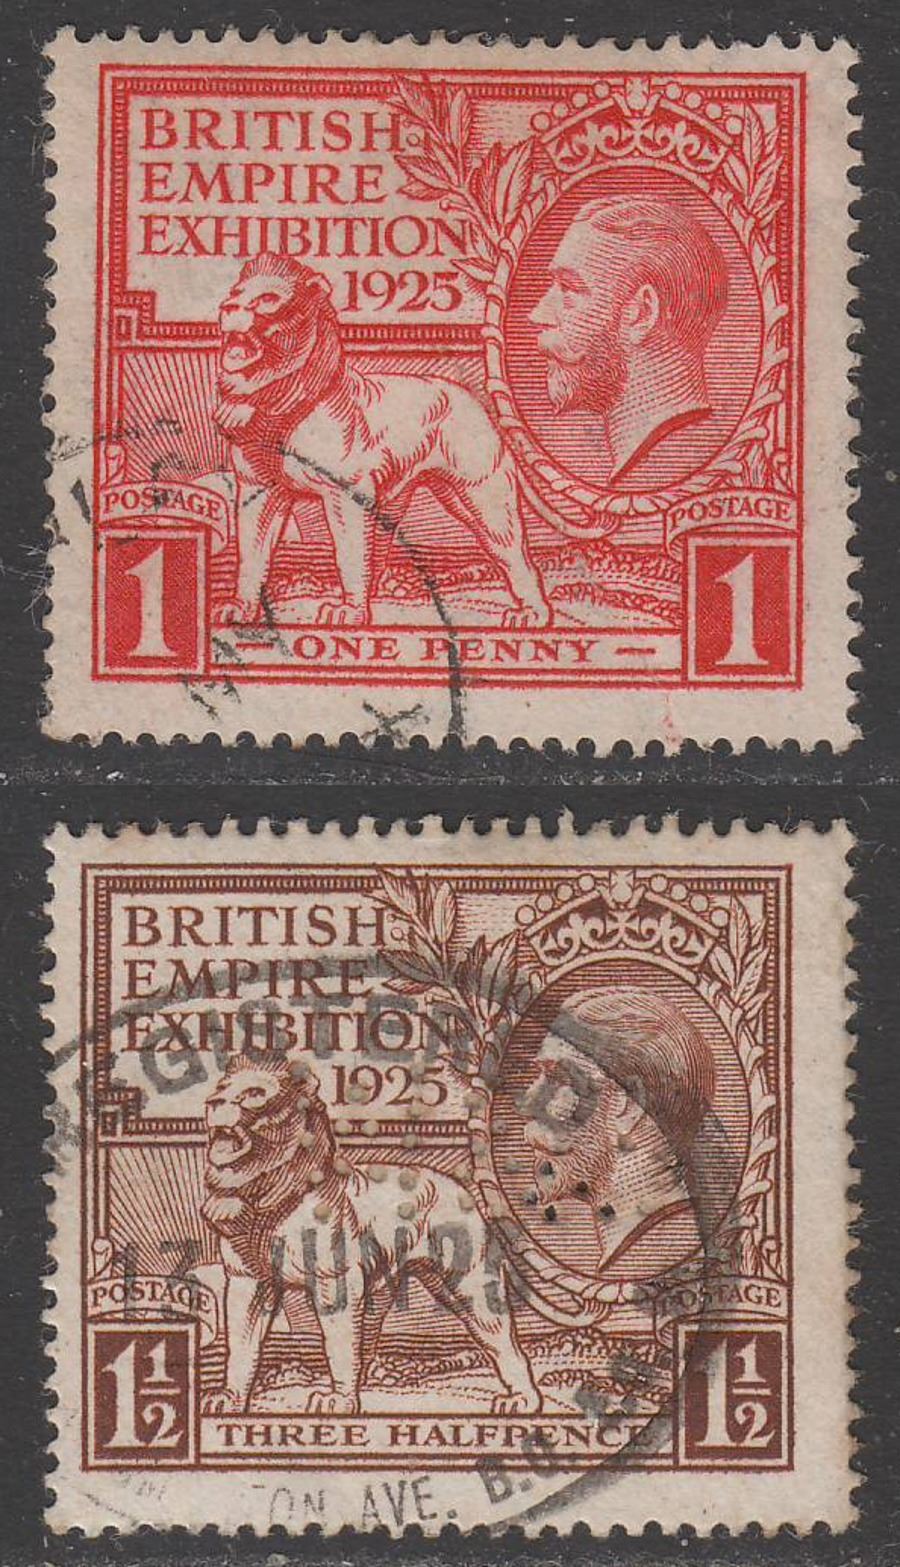 KGV 1925 British Empire Exhibition 1d, 1½d Used SG432-433 cat £100 1d large tear